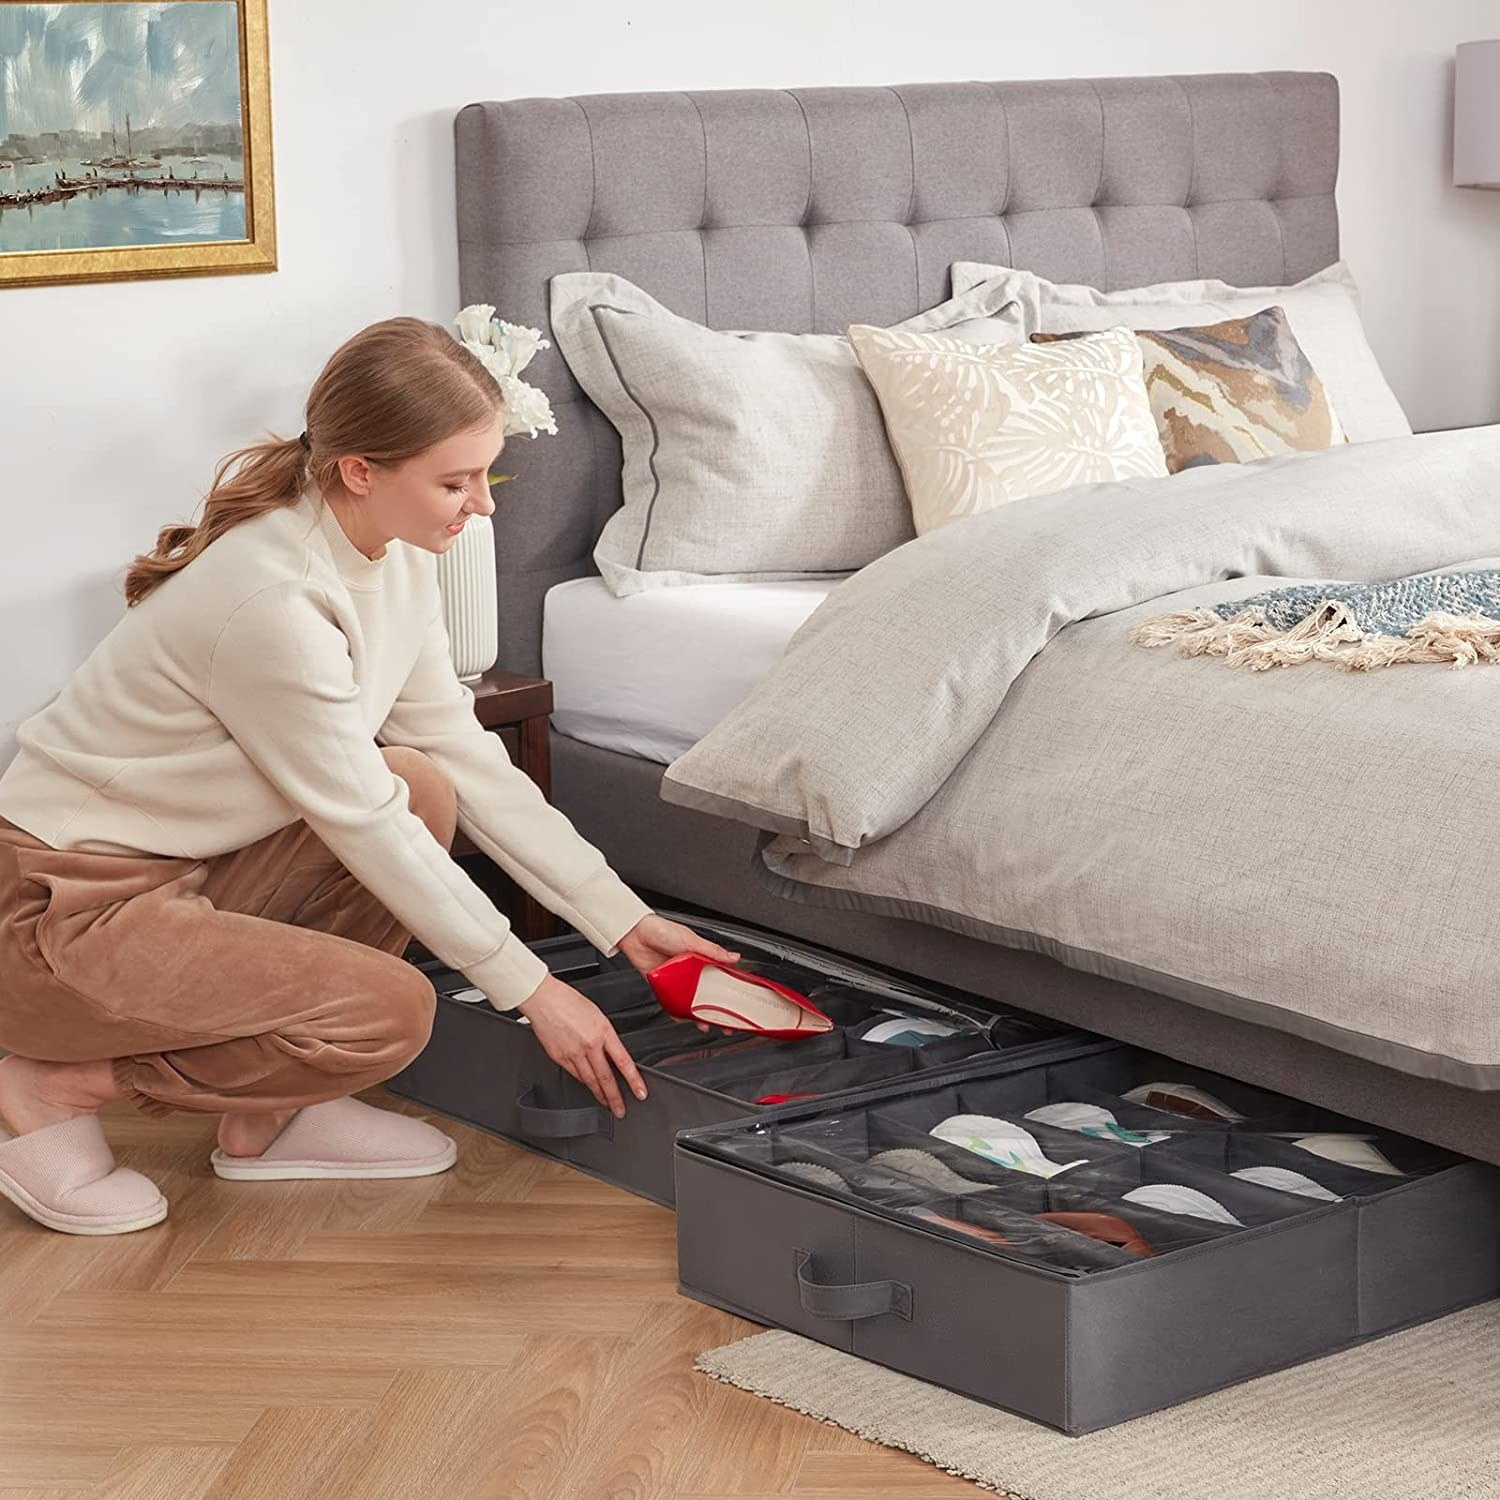 person sliding shoe box under the bed